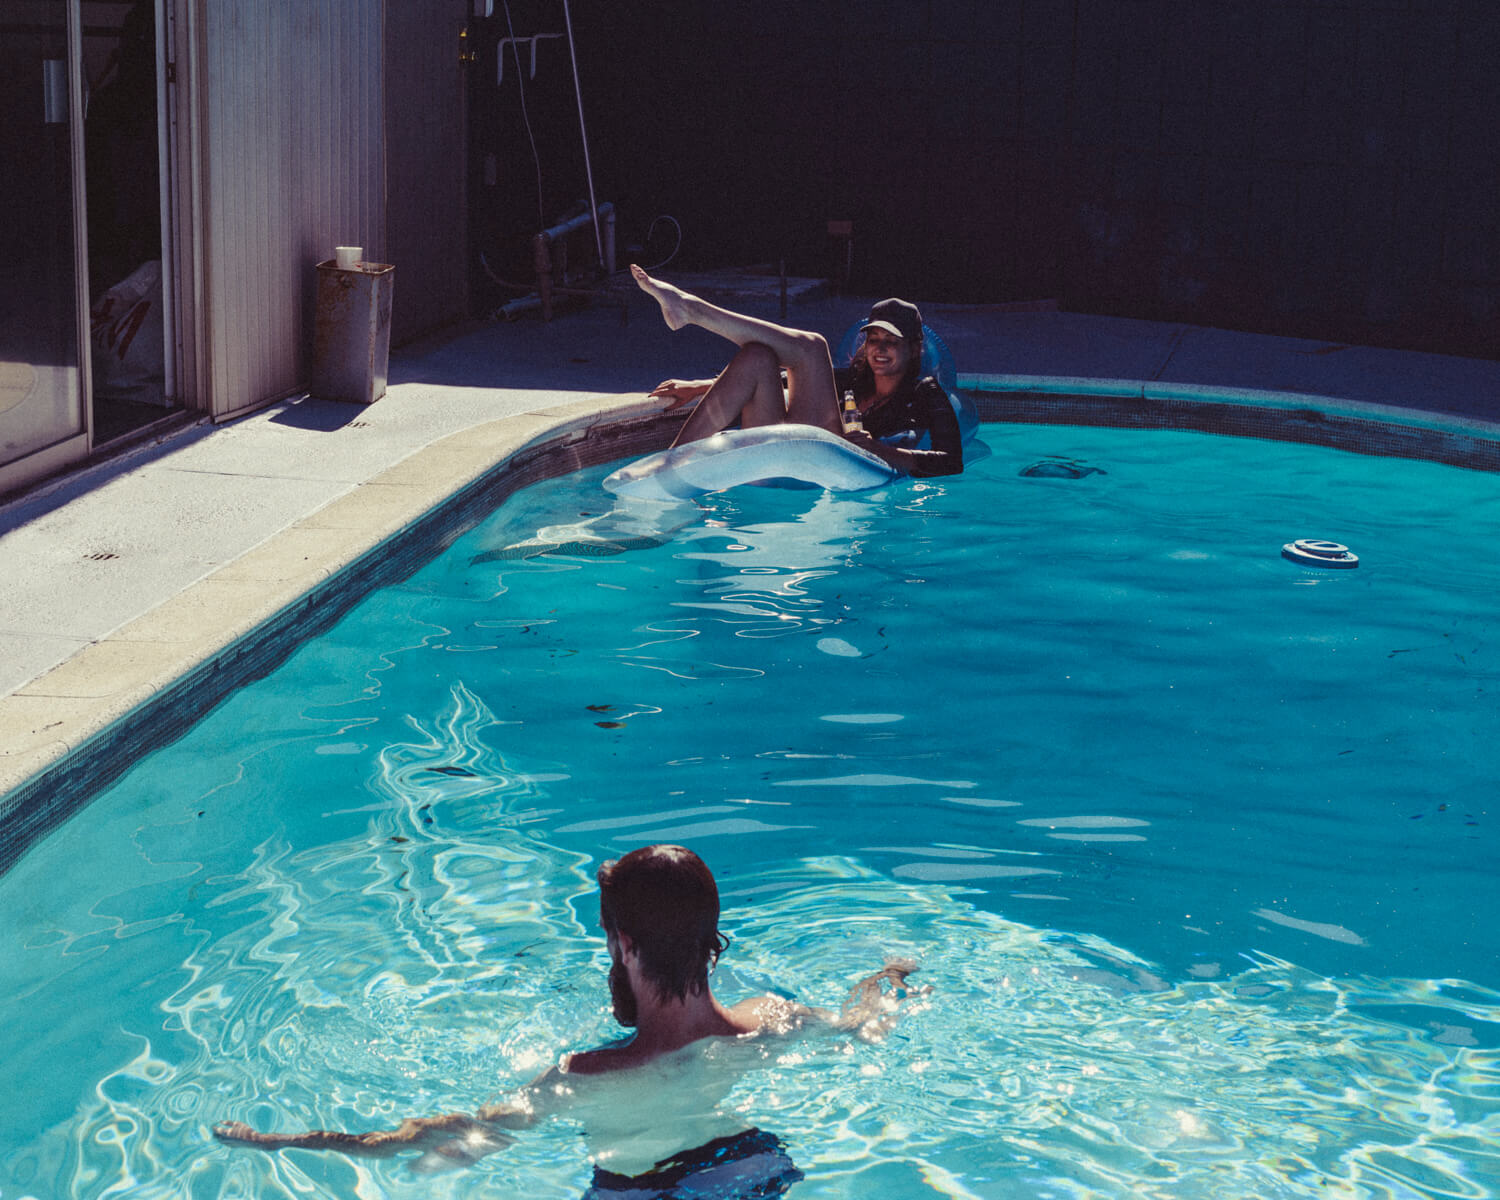 Hipsters at outdoor pool girl  by lifestyle photographer Tim Cole